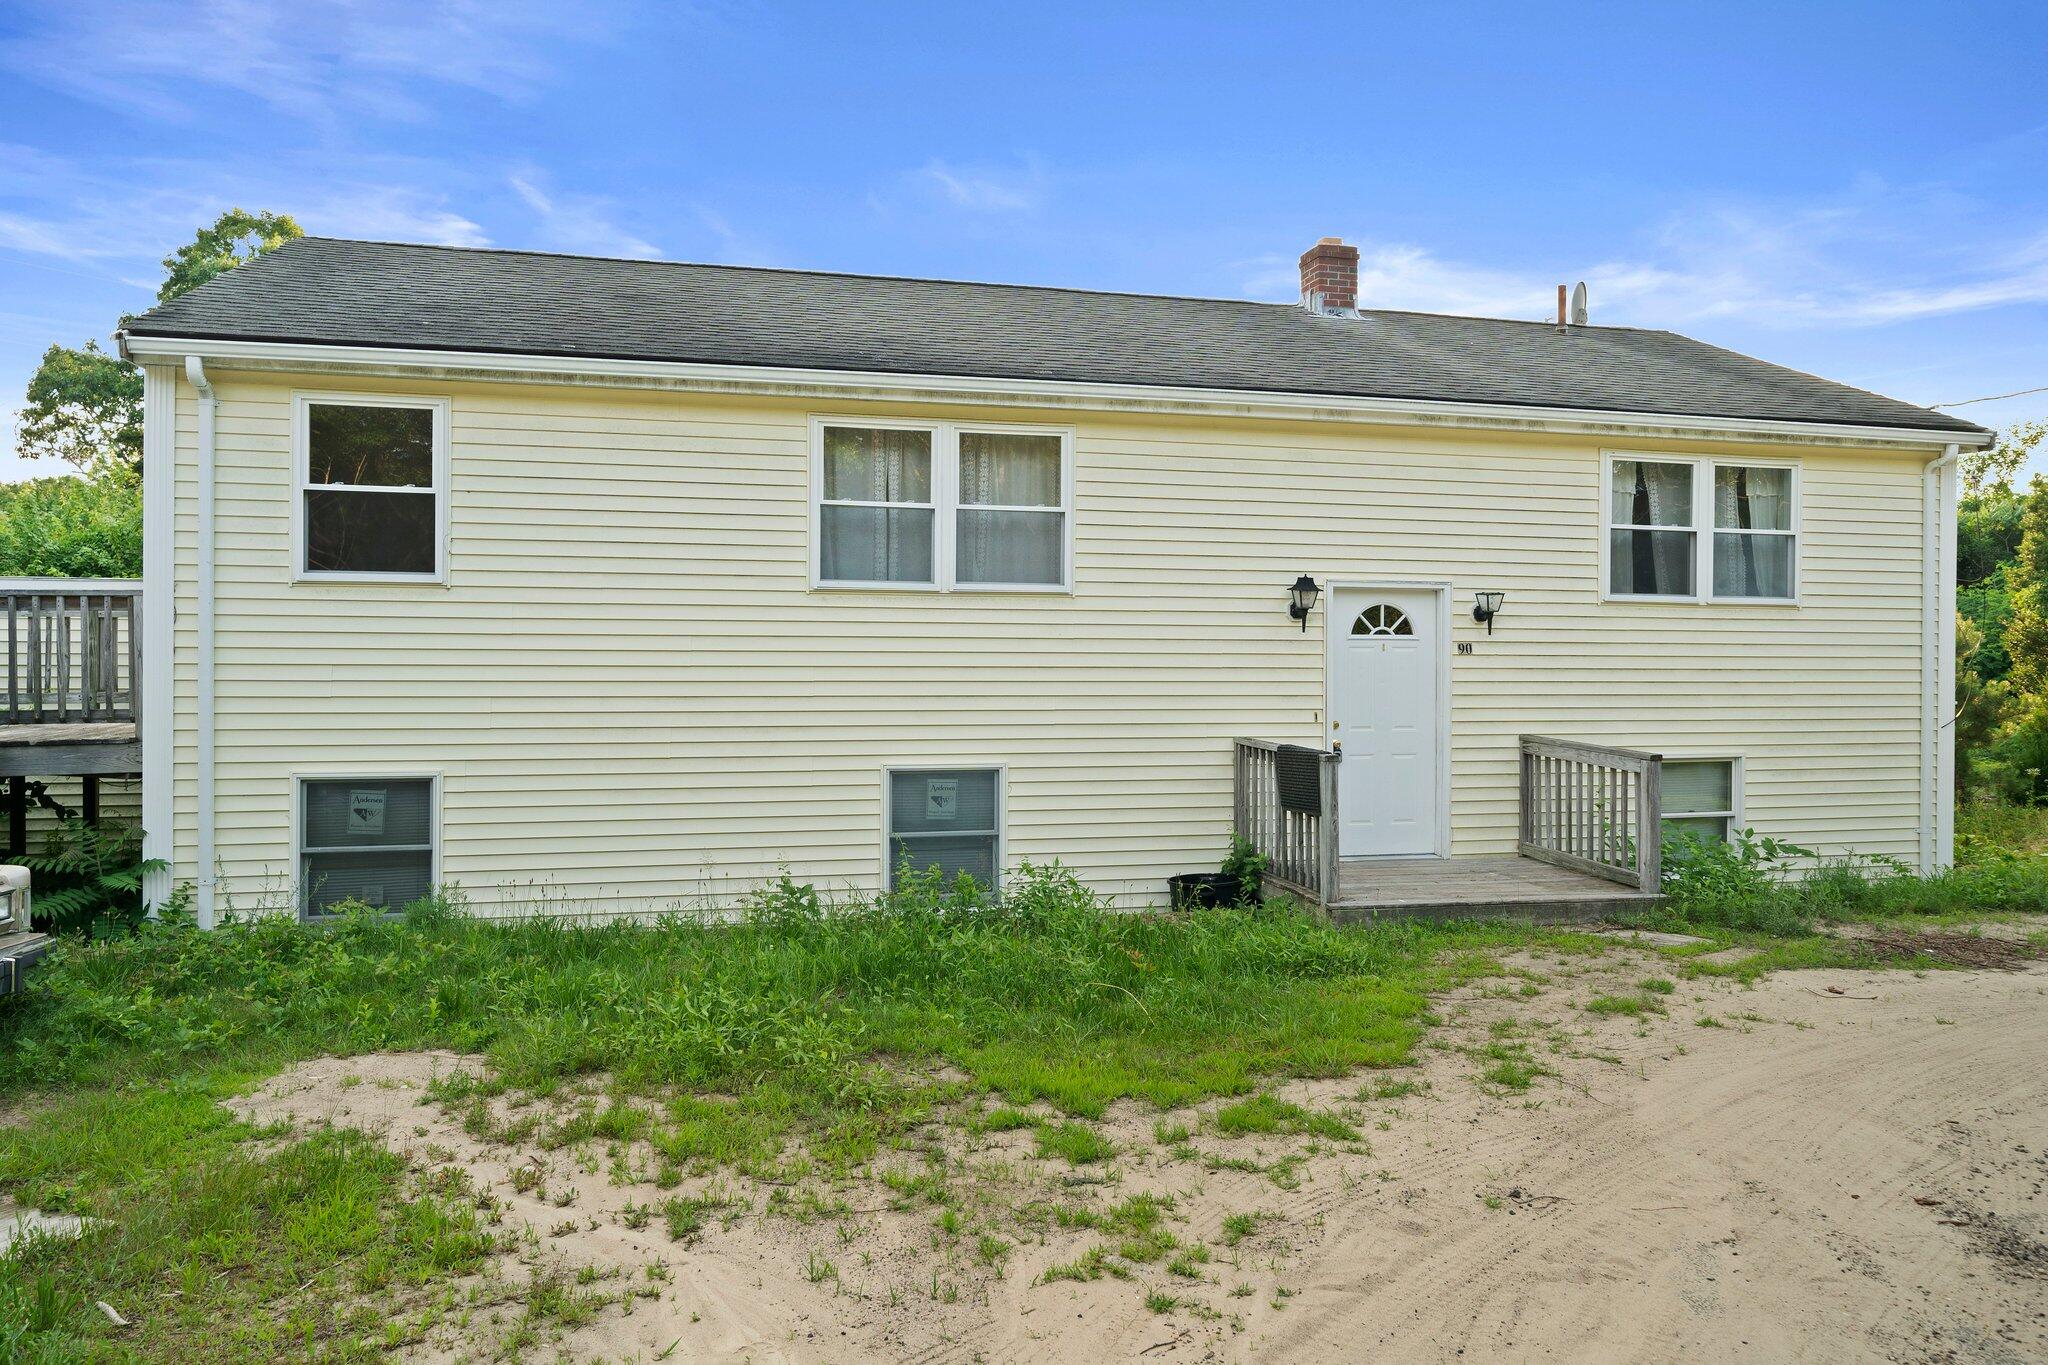 90 Hedges Pond Road, Plymouth, Massachusetts 02360, 2 Bedrooms Bedrooms, 4 Rooms Rooms,1 BathroomBathrooms,Residential,For Sale,90 Hedges Pond Road,22400458